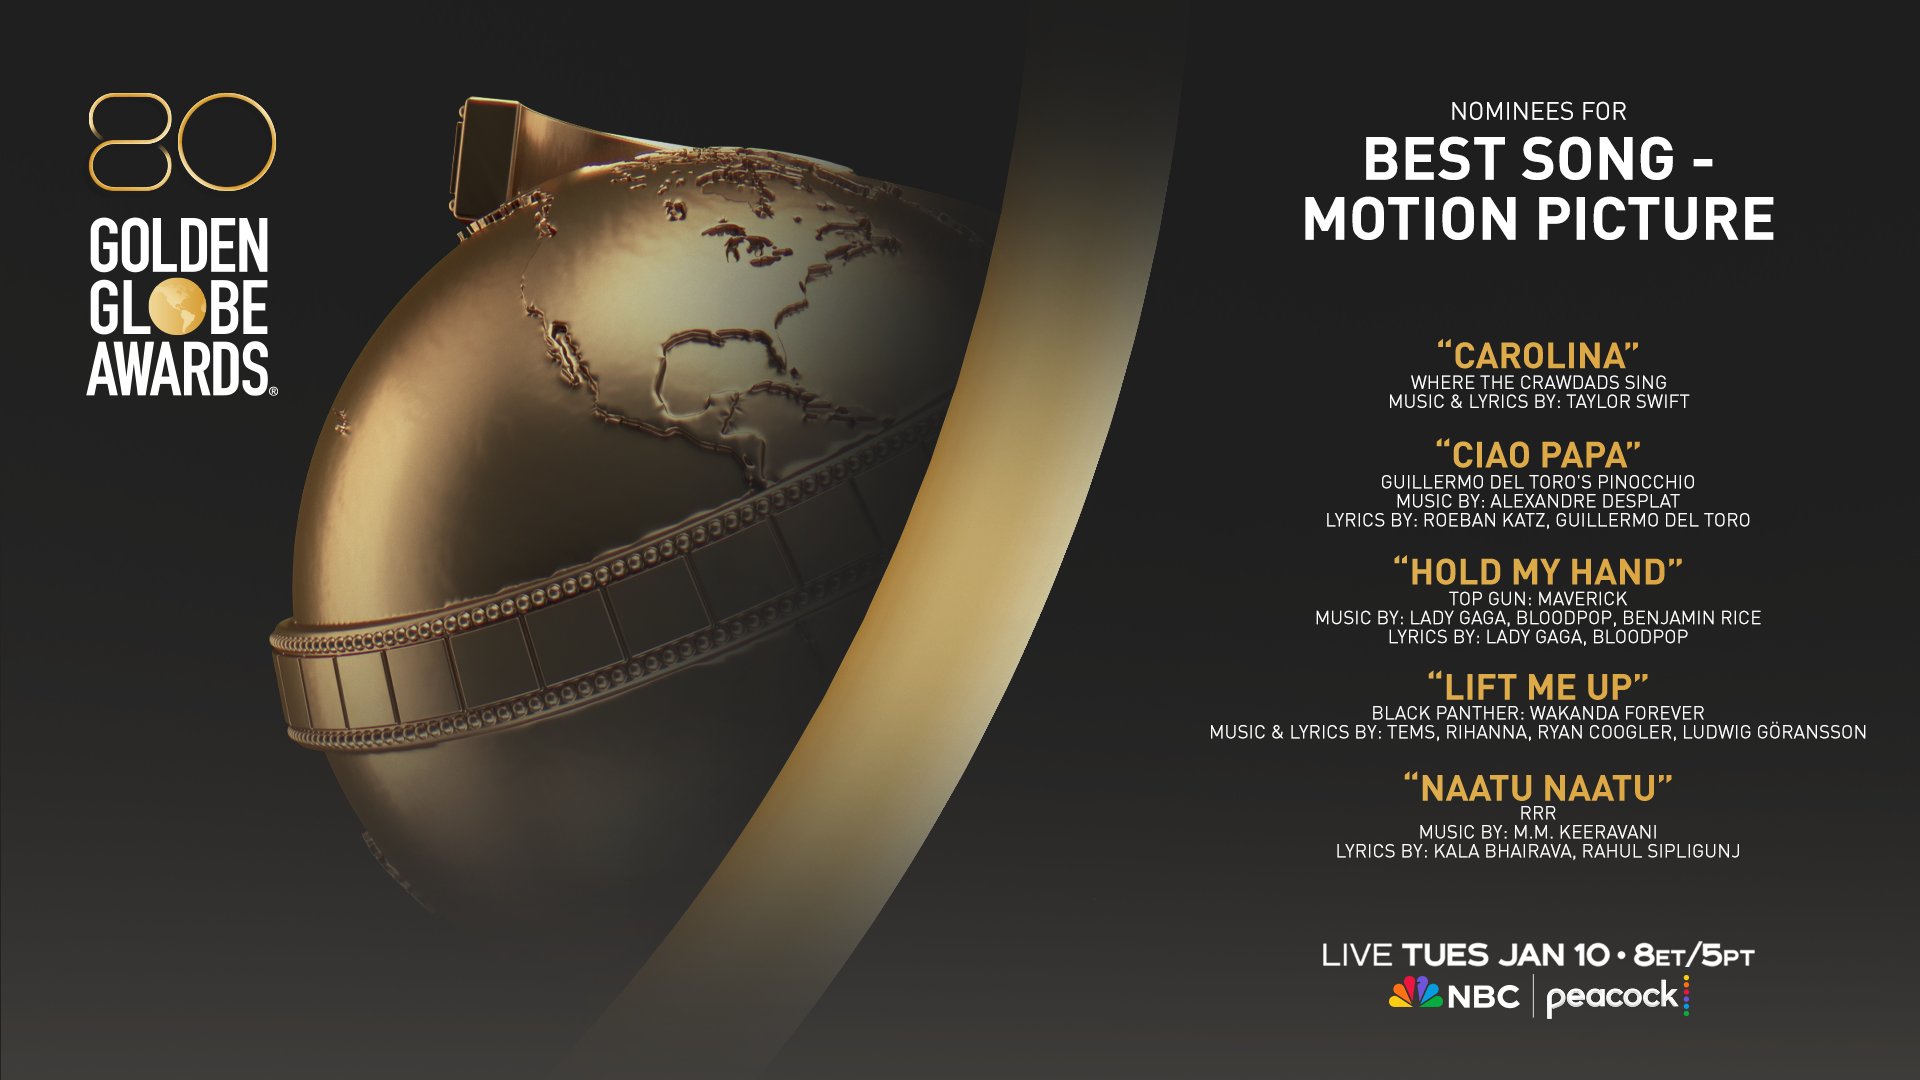 Nominees for Best Song - Motion Picture